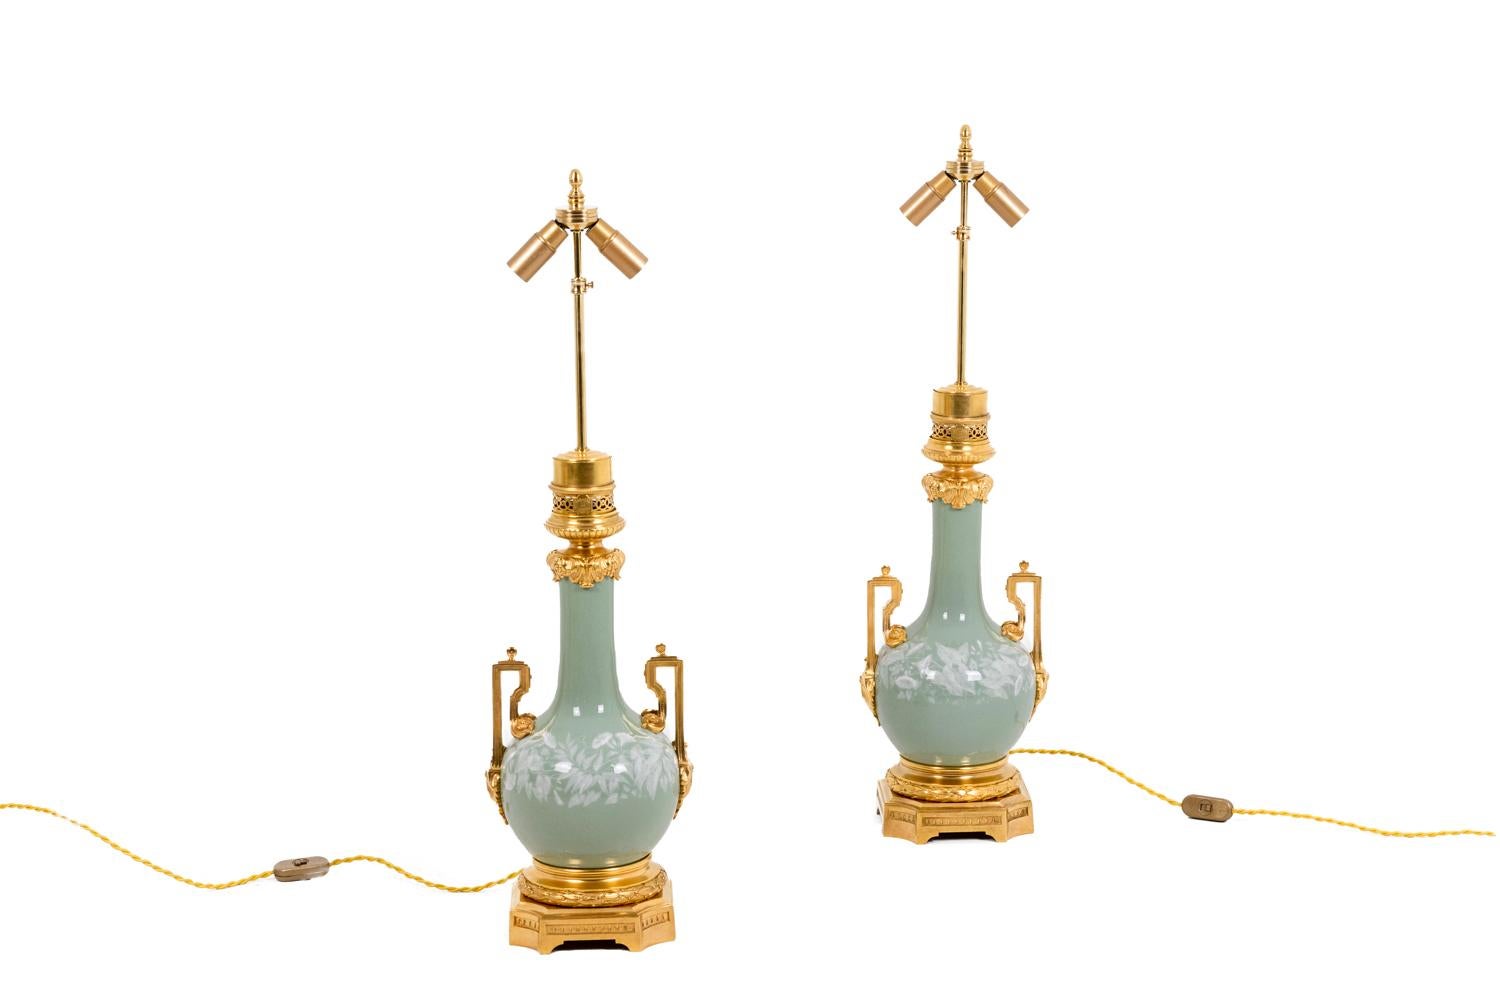 Maison Gagneau, signed.

Pair of lamps in celadon porcelain baluster-shaped. Panse adorned with garlands of bindweed in white enamel on a celadon background. Openwork handles adorned with acanthus leaves and rosettes. Frame in chiseled and gilded